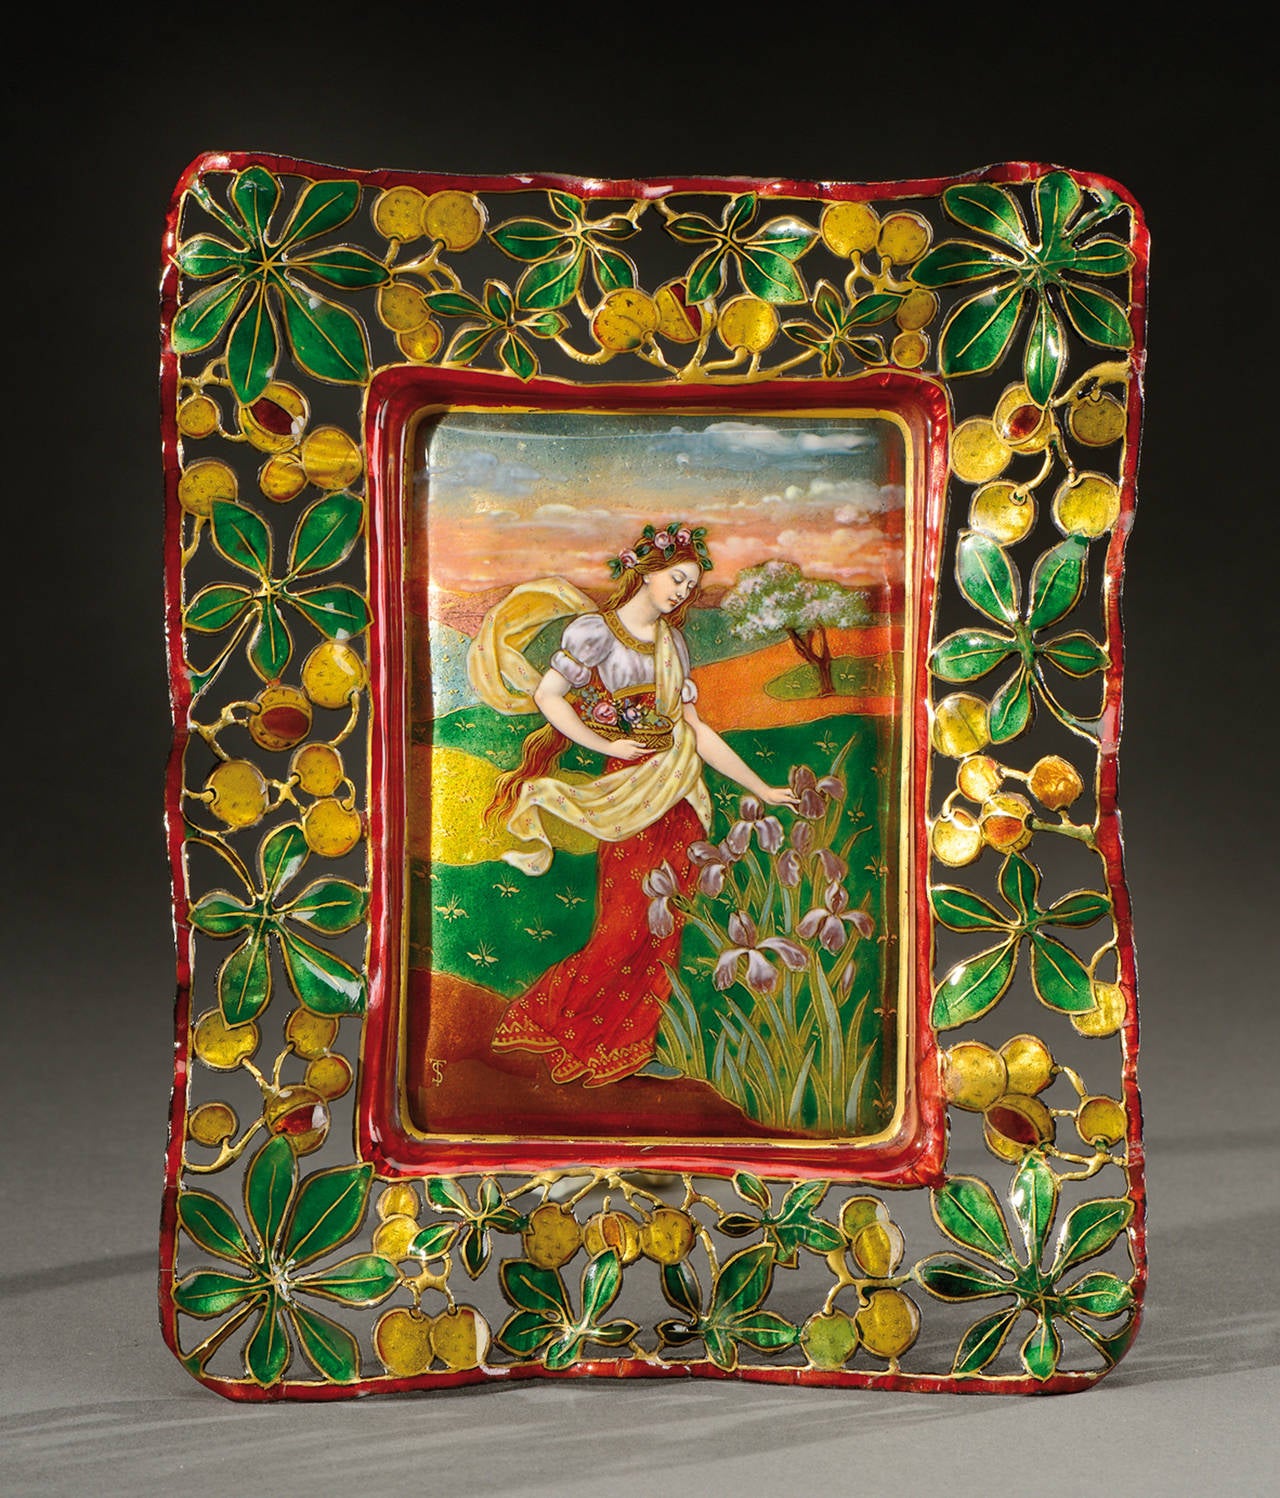 Joint work of an enameller, Théophile Soyer (1853-1940) and a designer, Eugène Grasset, this small precious, refined object uses the motif of a stained glass window, titled 